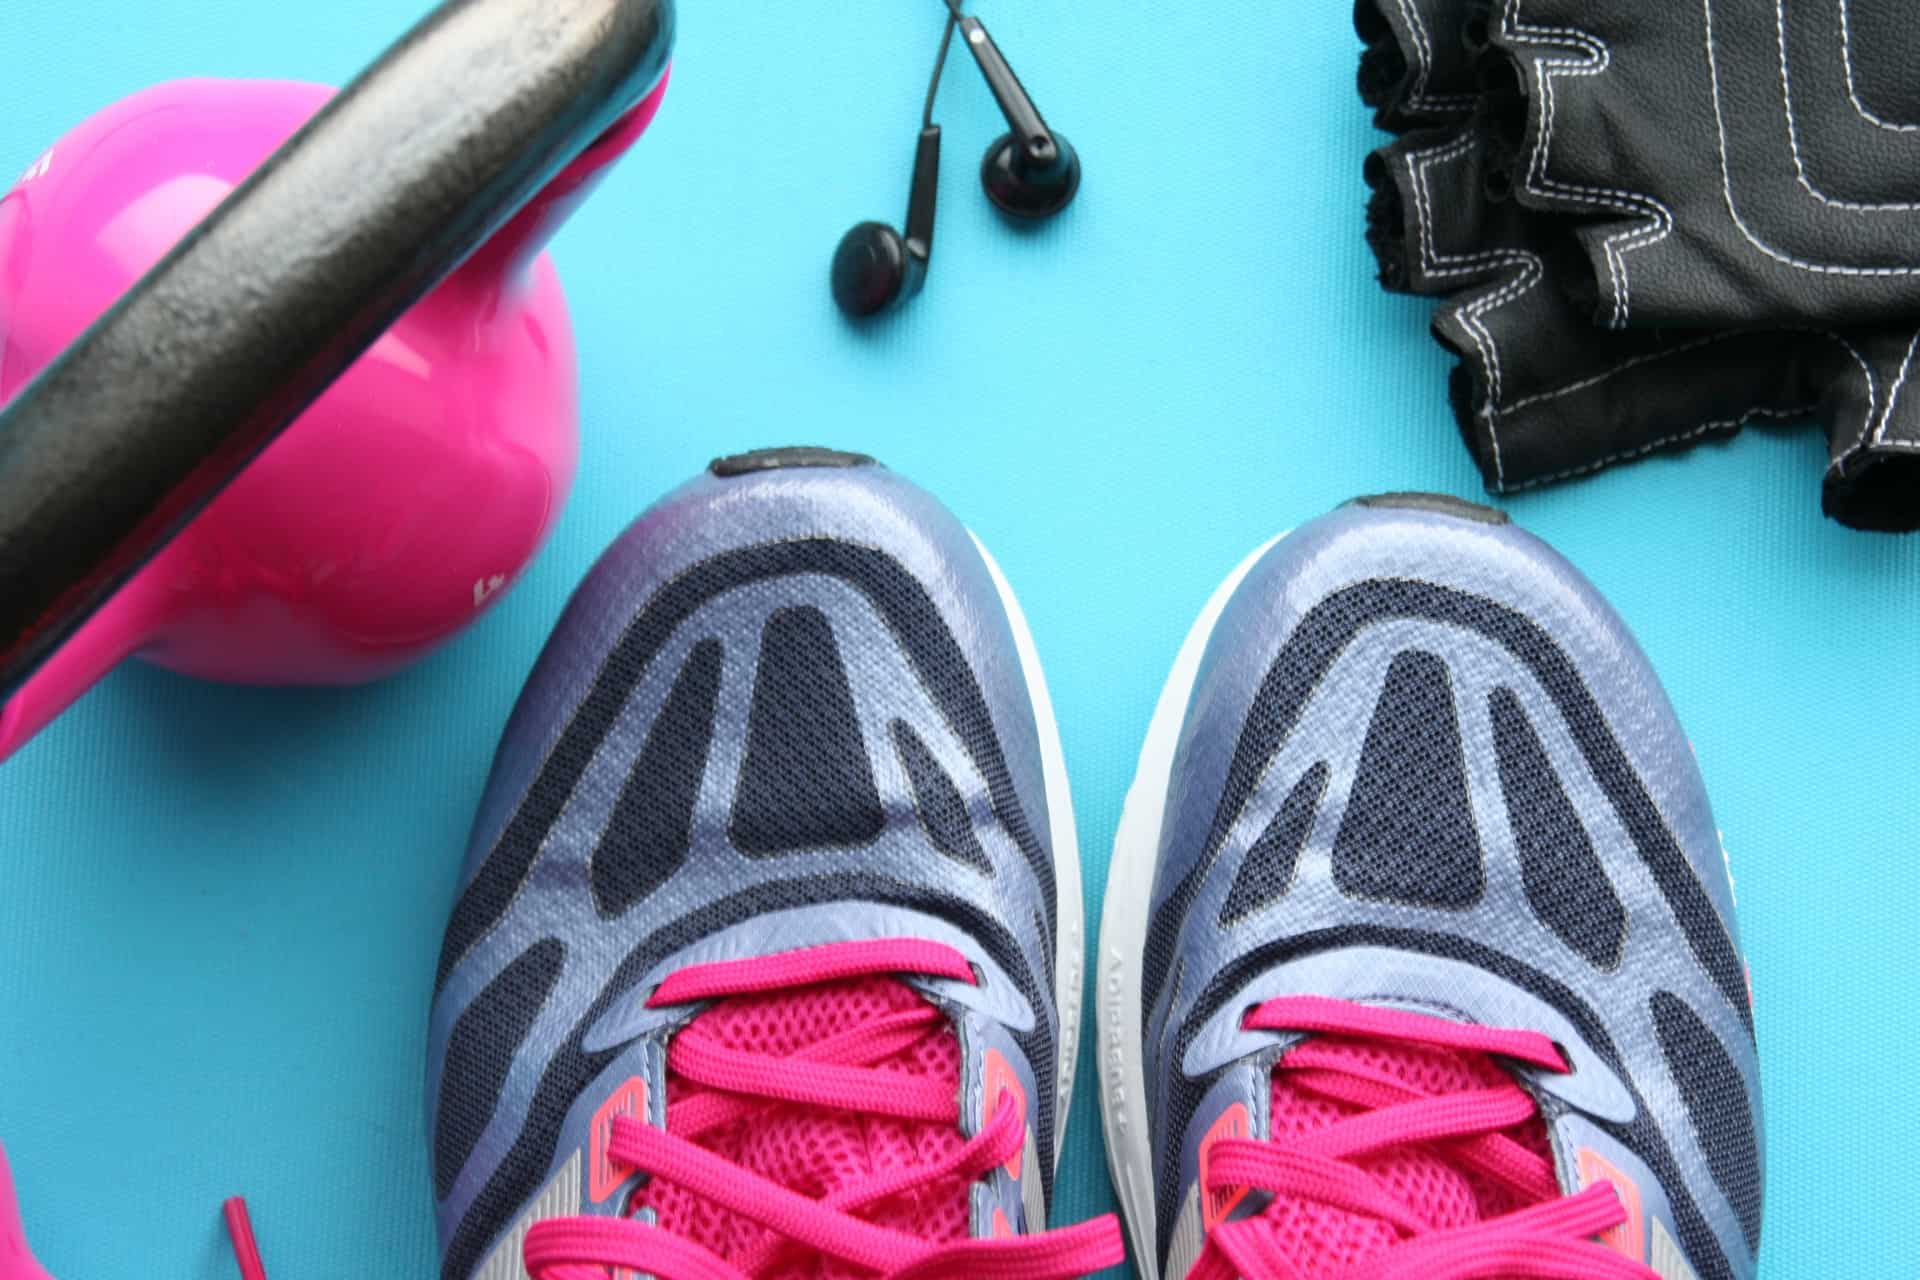 What to consider when choosing women’s gym shoes?